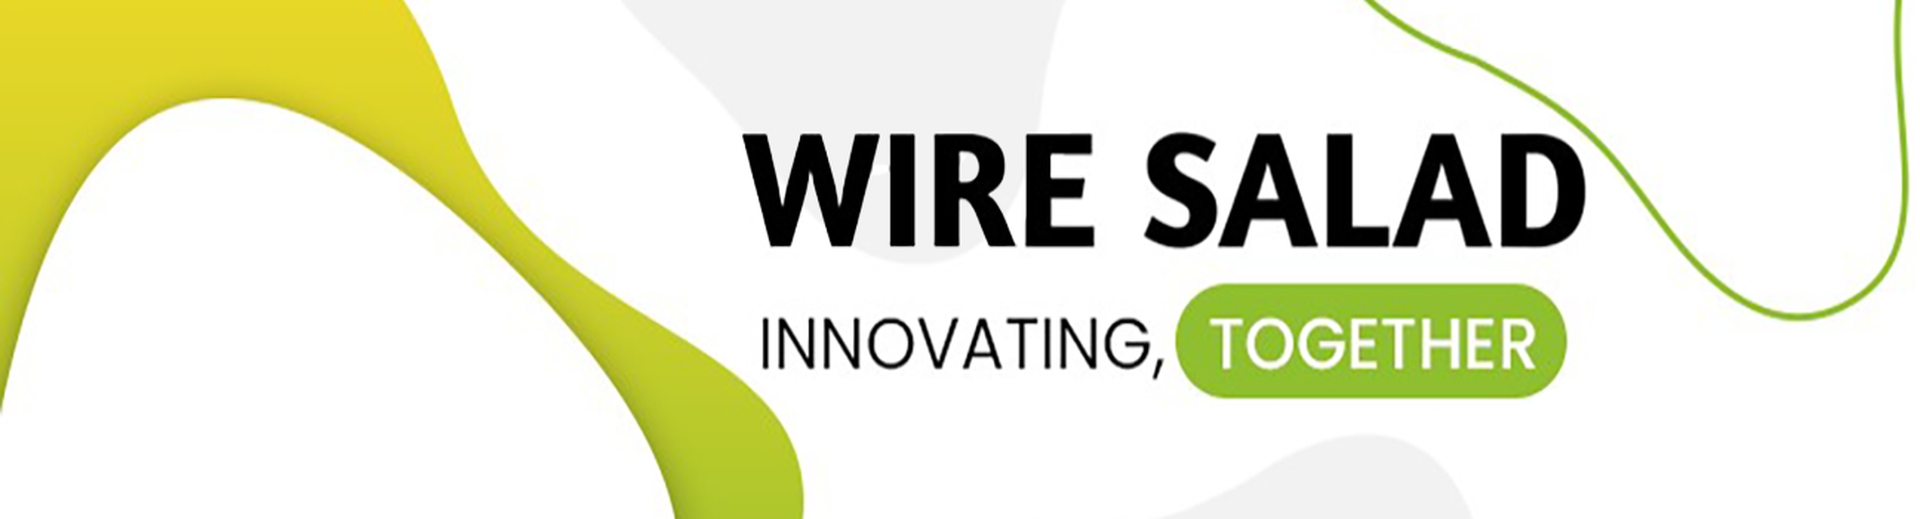 WIRE SALAD is a technology company focused on creating value-based digital applications, e-commerce products, and metaverse experiences.